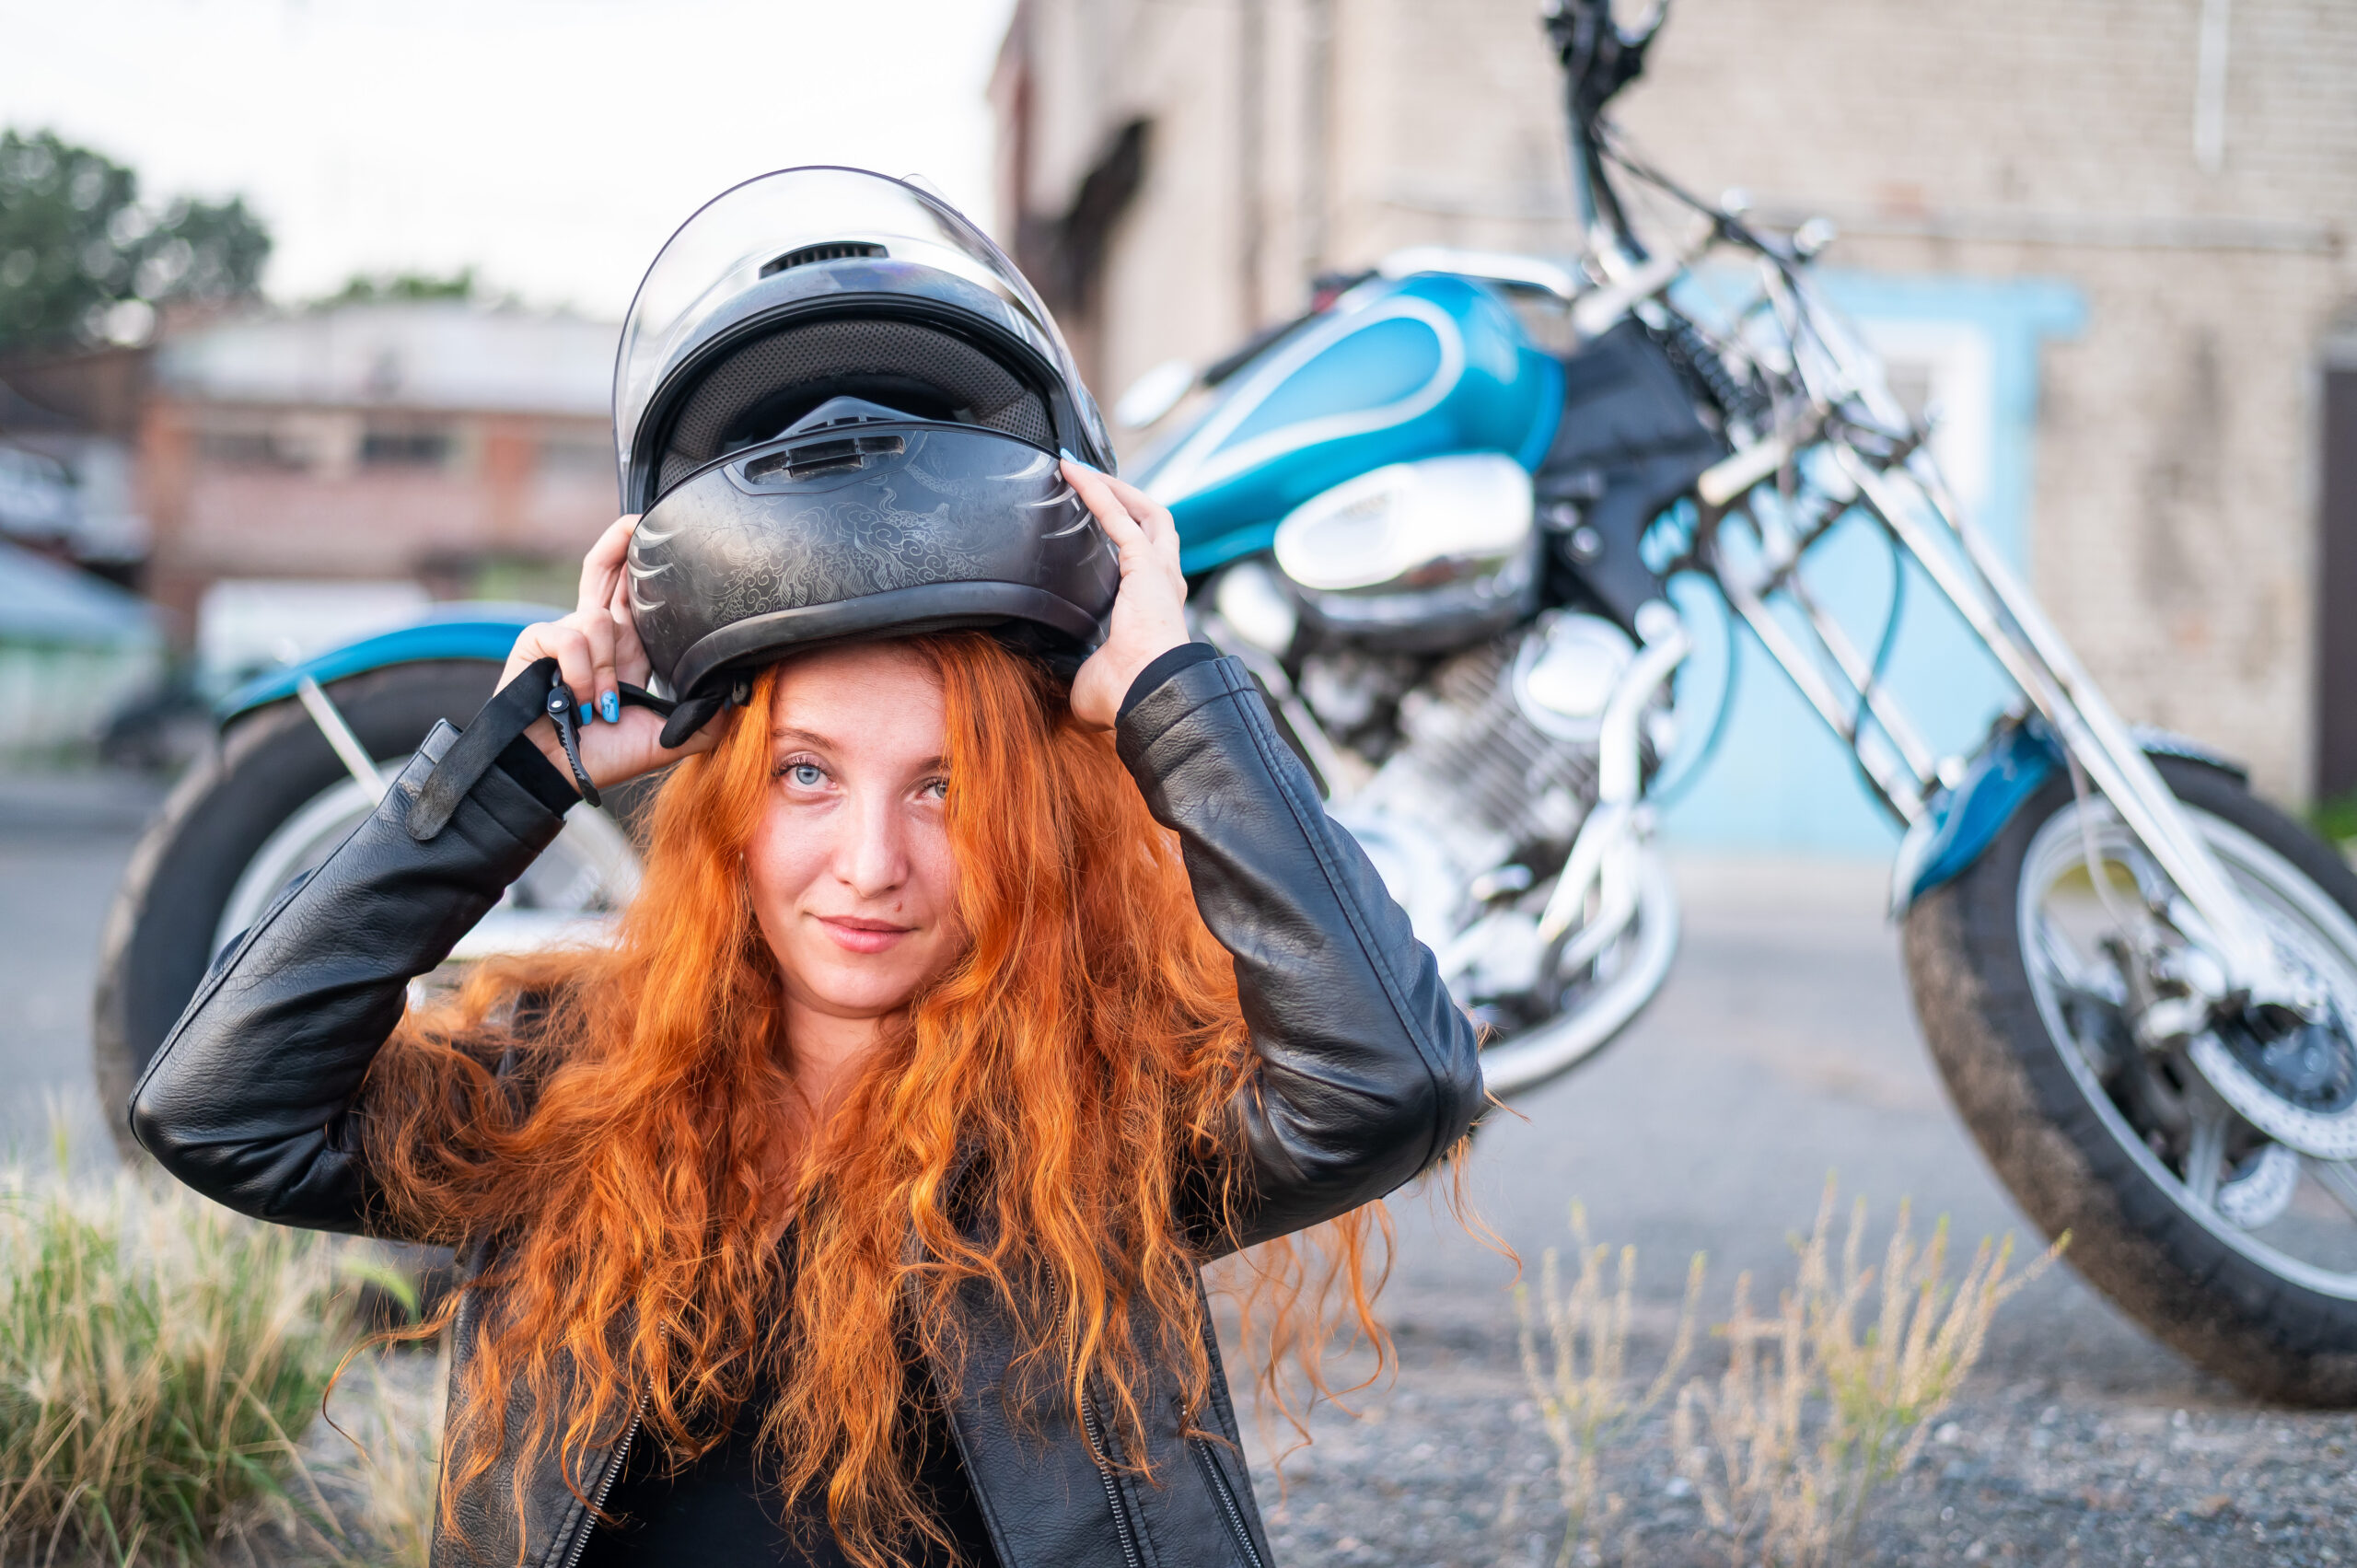 A red-haired woman puts on a helmet for safe motorcycle riding